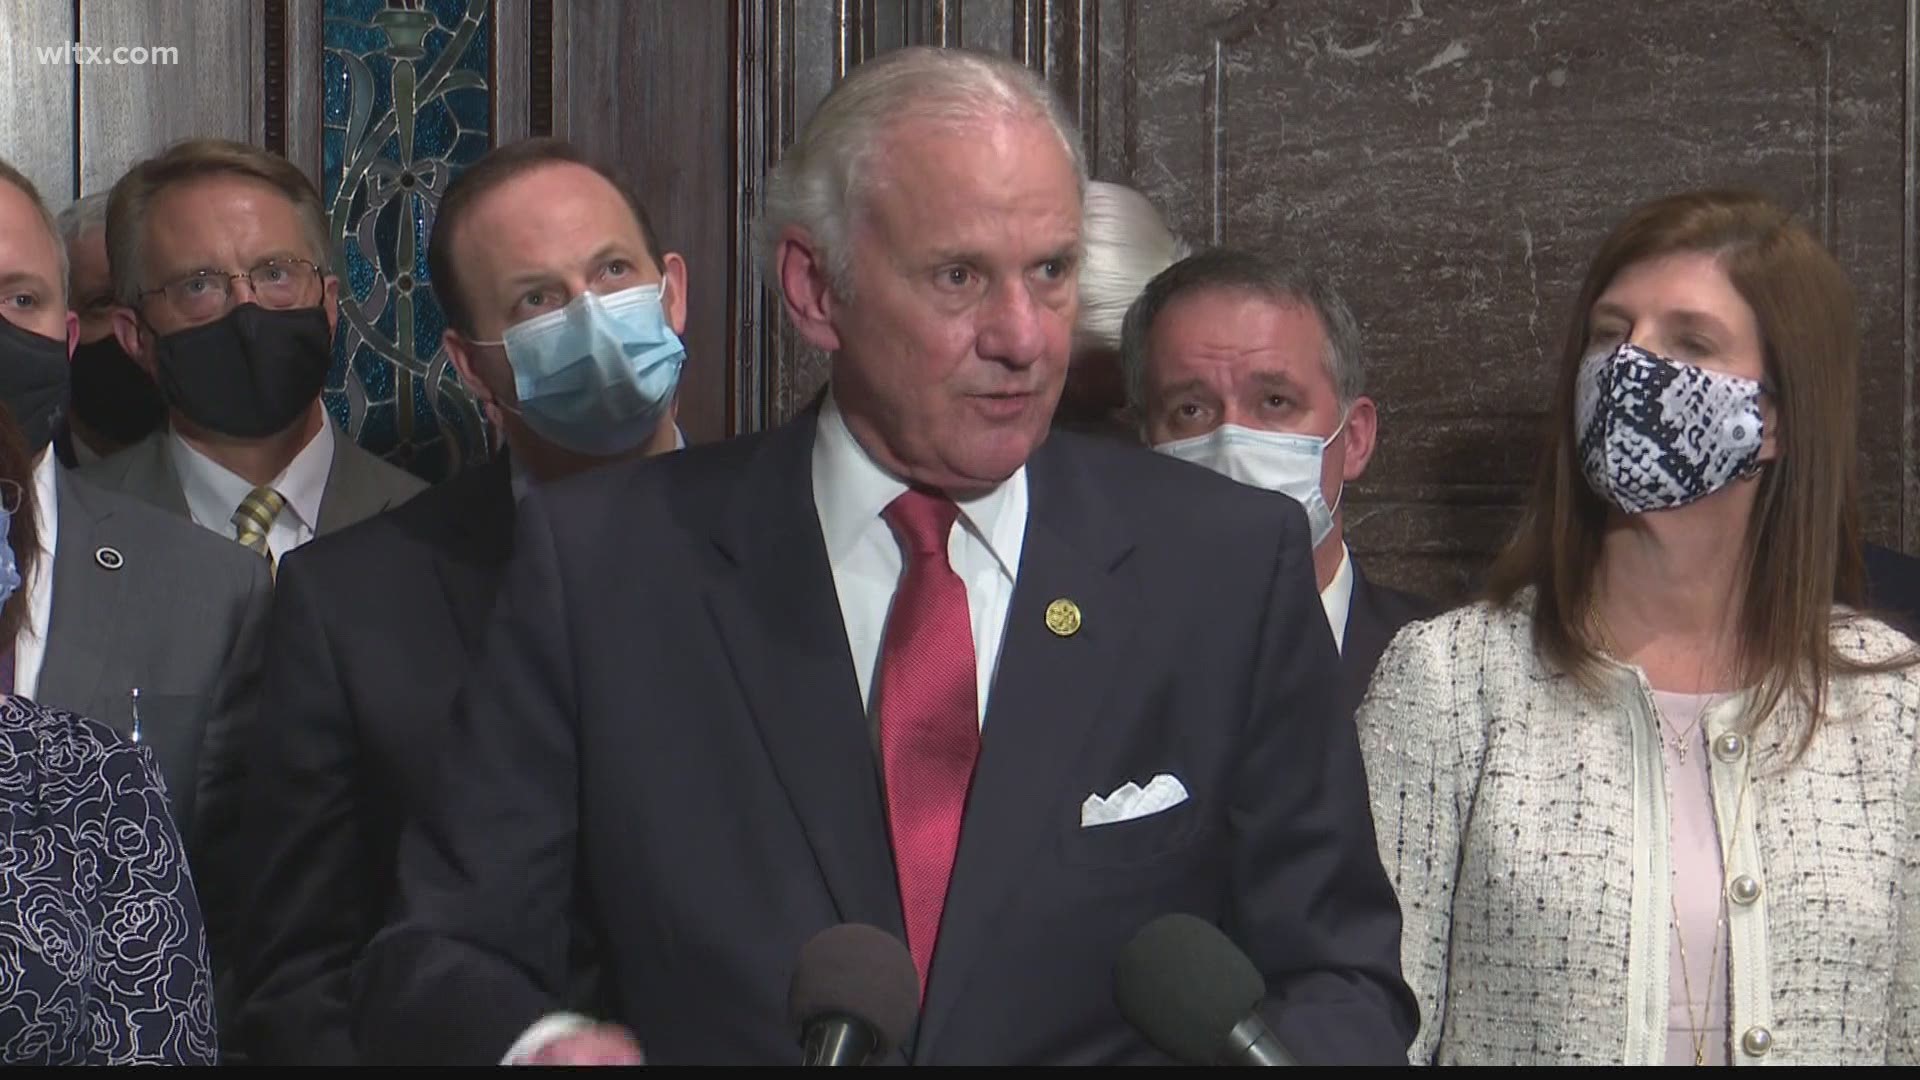 Gov. McMaster signed the 'Fetal Heartbeat' bill into law, but already lawsuits have been filed.